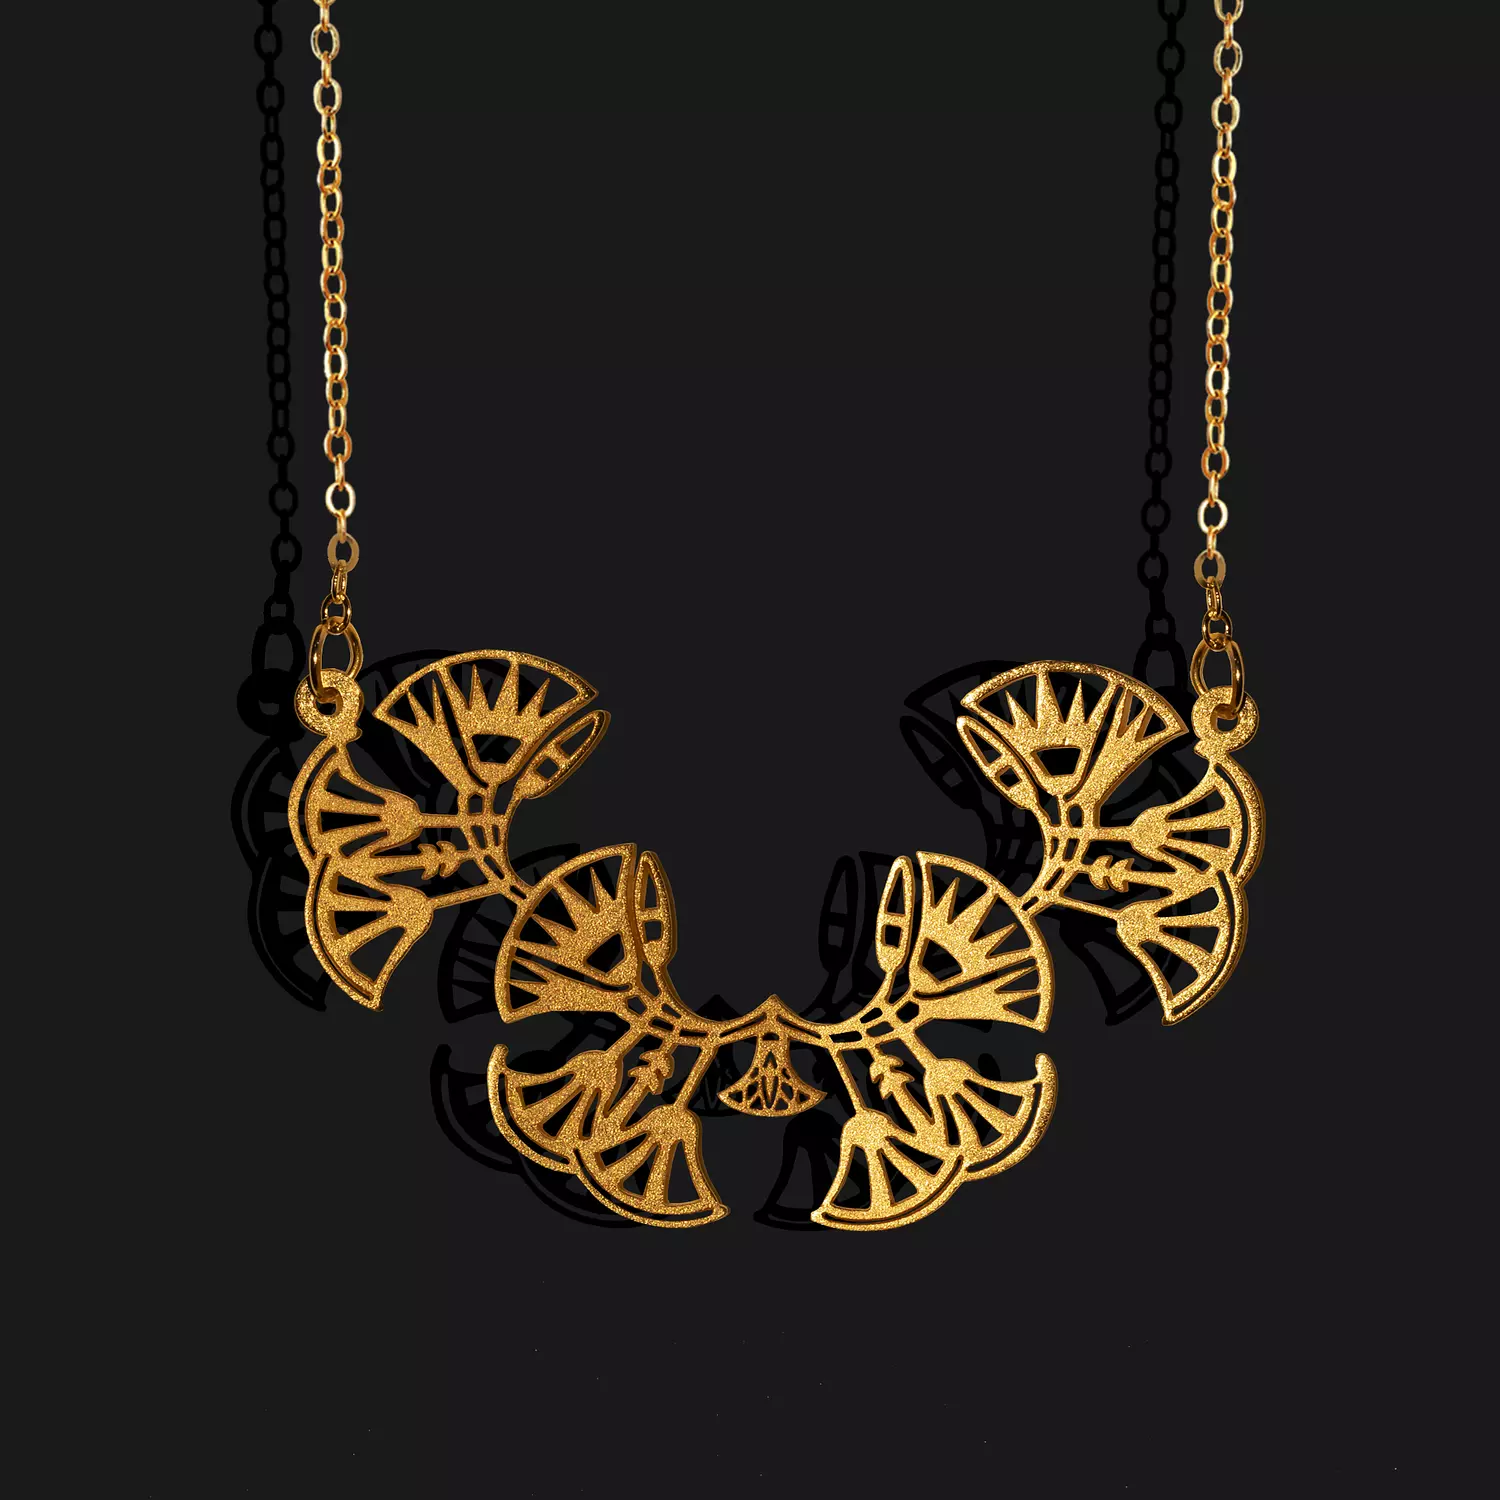 Lotus necklace hover image